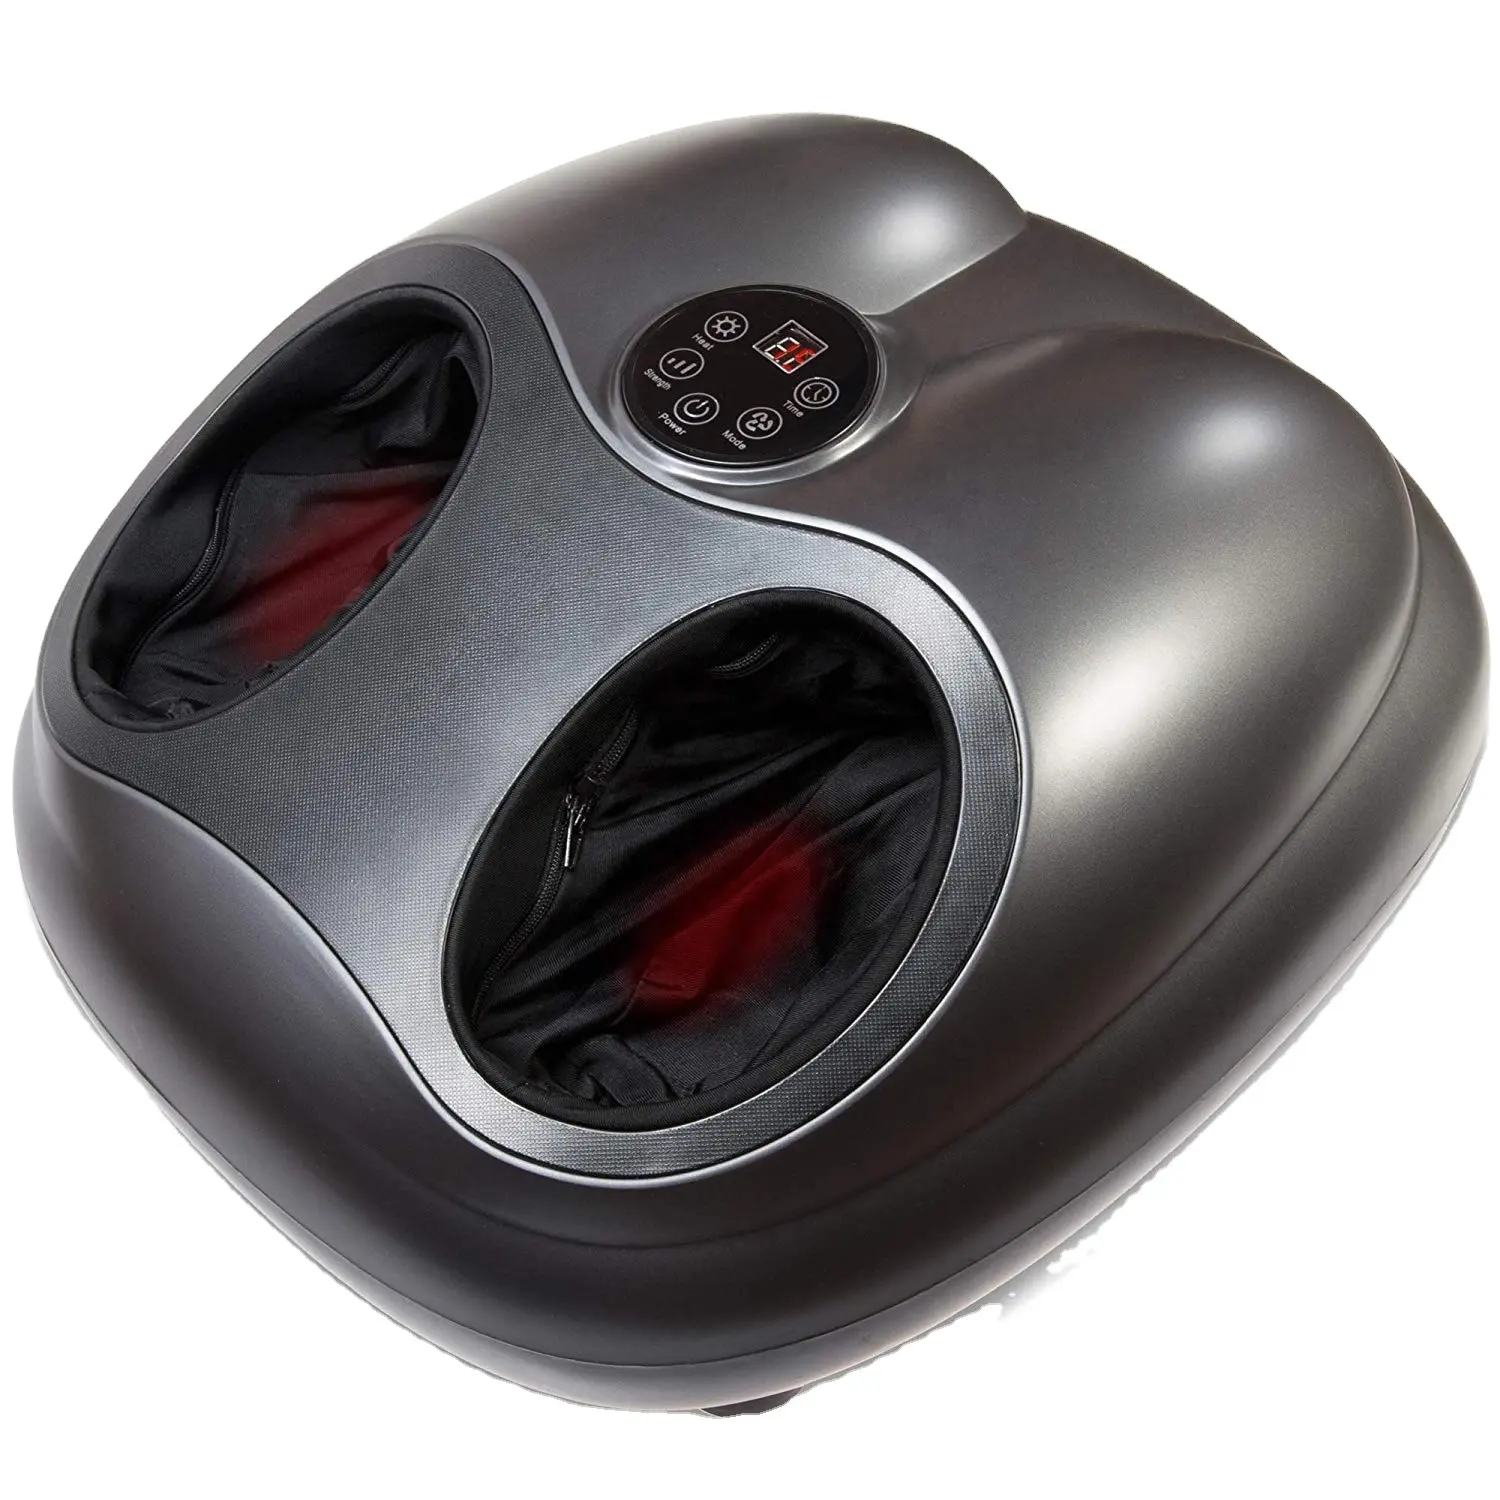 Foot massager air compressure foot massager with heat rolling